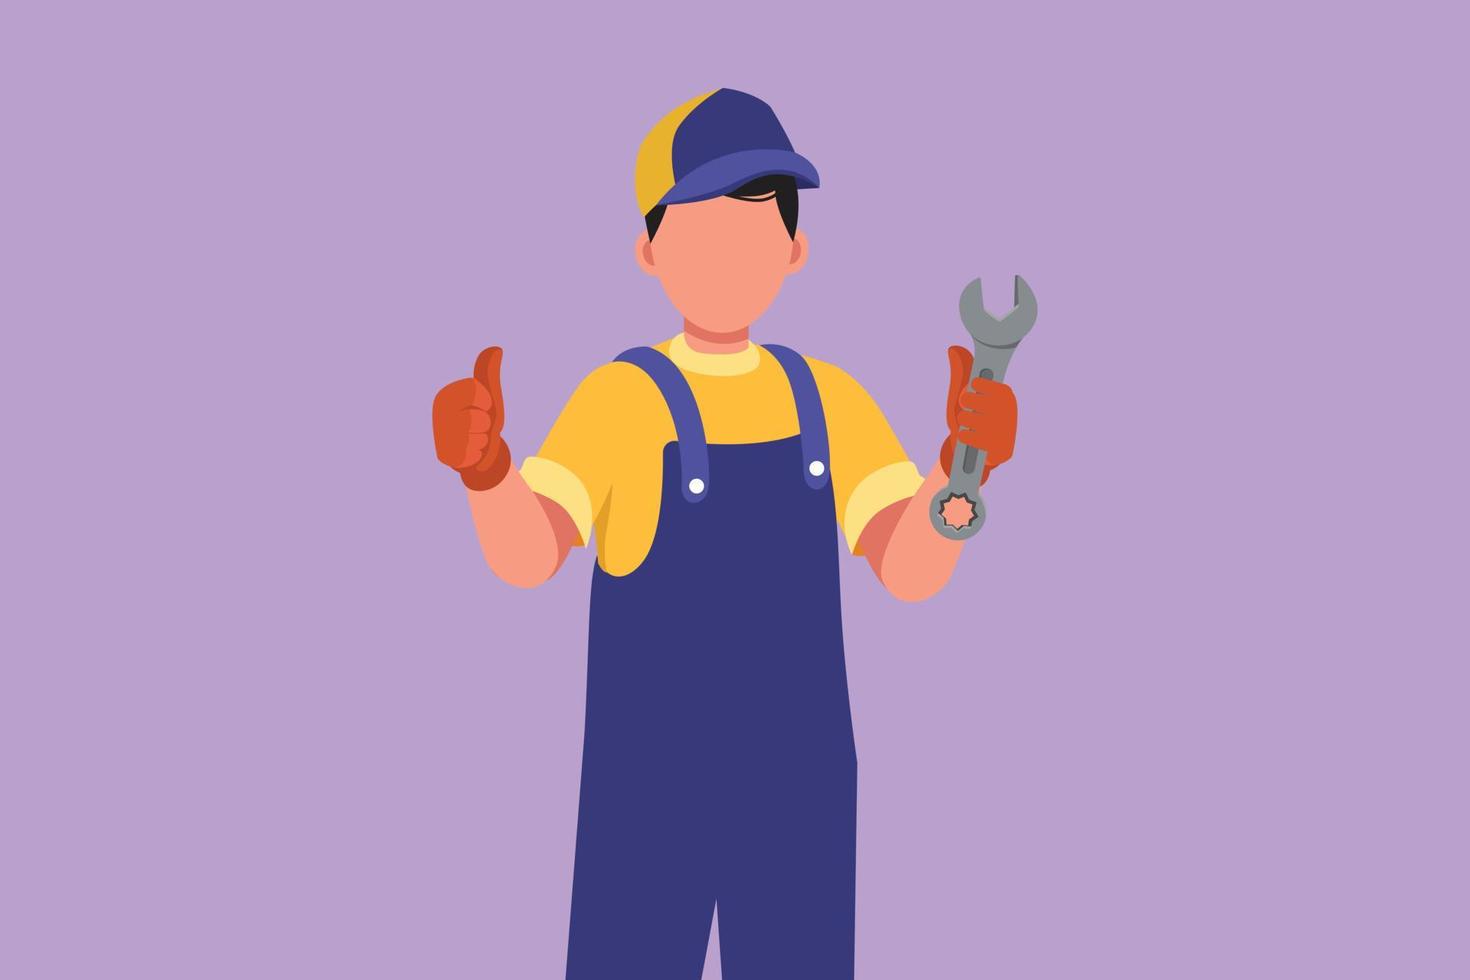 Cartoon flat style drawing attractive male mechanic holding wrench with thumbs up gesture and ready to perform maintenance on the vehicle engine or transportation. Graphic design vector illustration